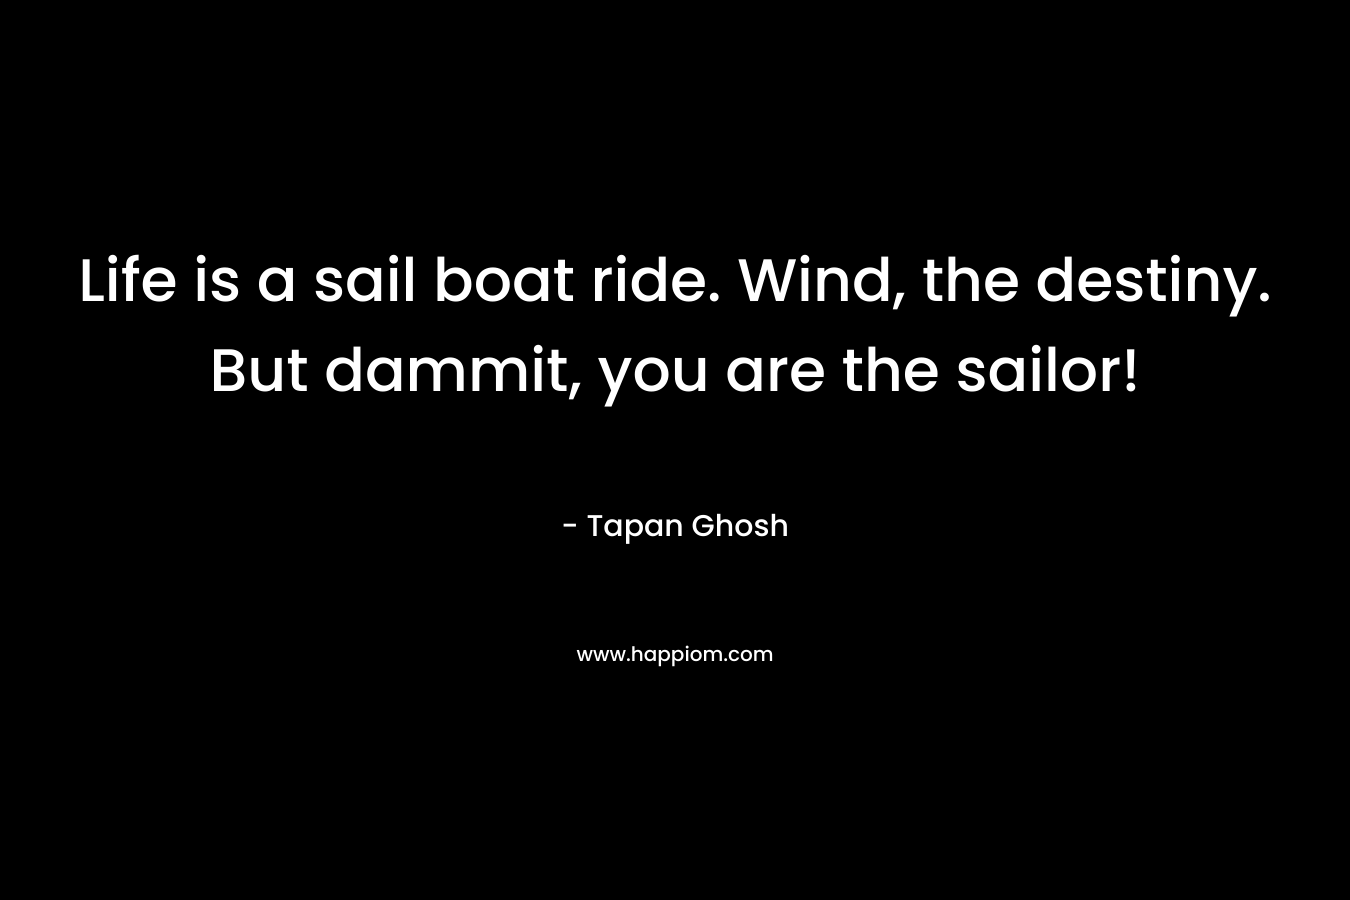 Life is a sail boat ride. Wind, the destiny. But dammit, you are the sailor!